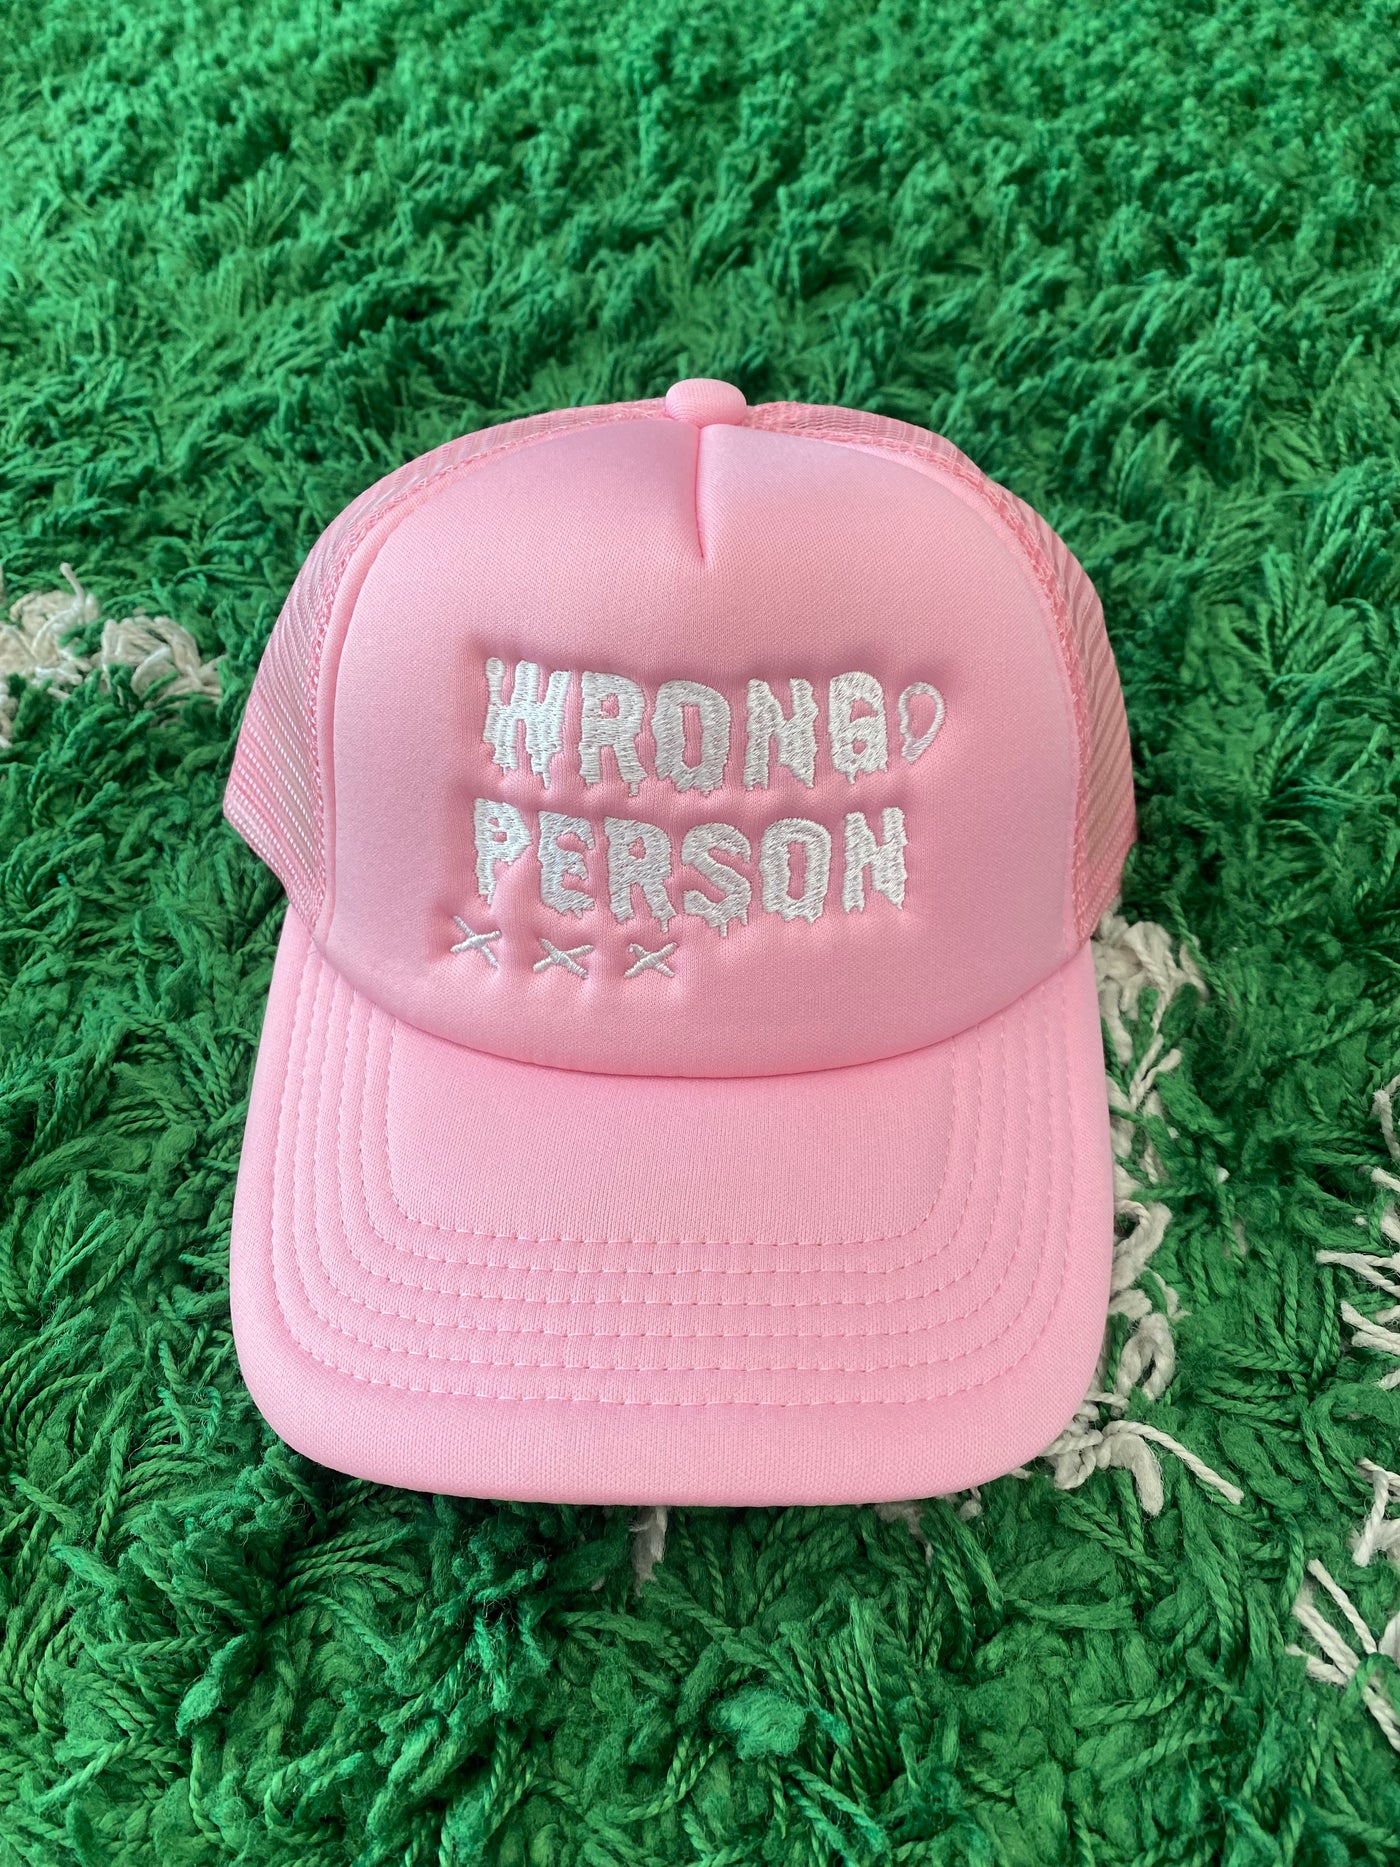 Wrong Person Trucker Hat